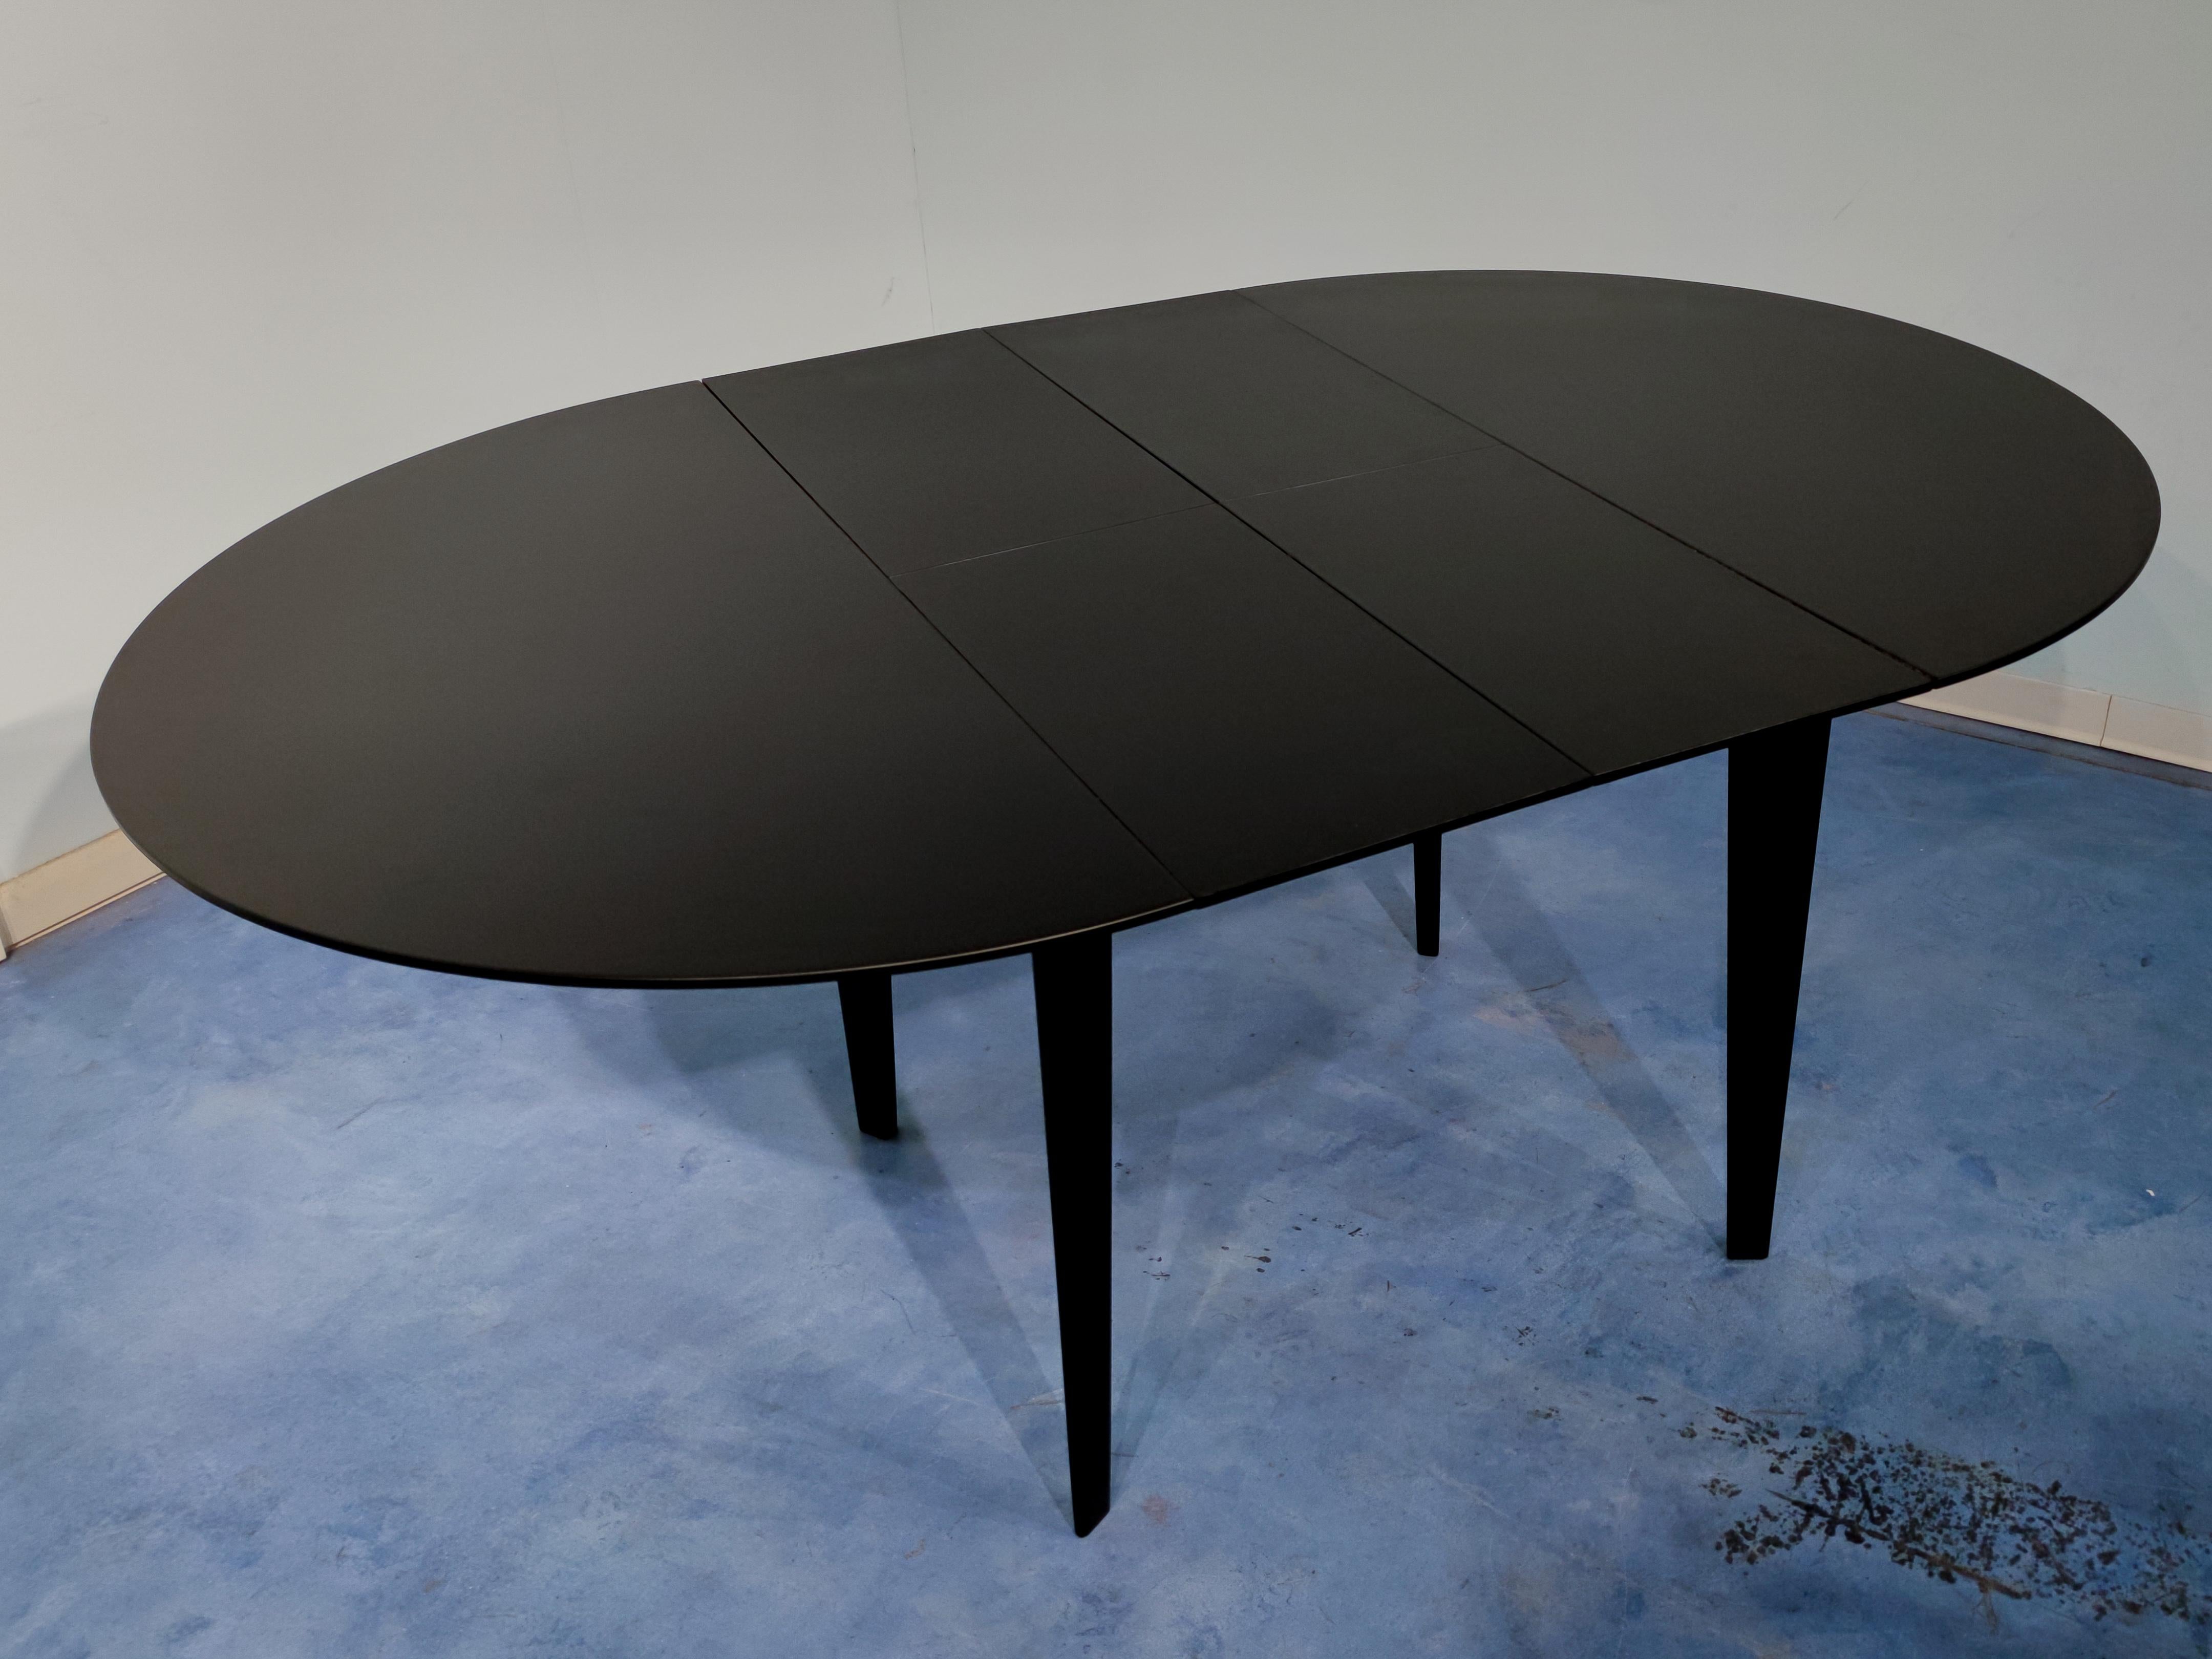 Italian Midcentury Extendable Dining Table by Vittorio Dassi, 1950s For Sale 6